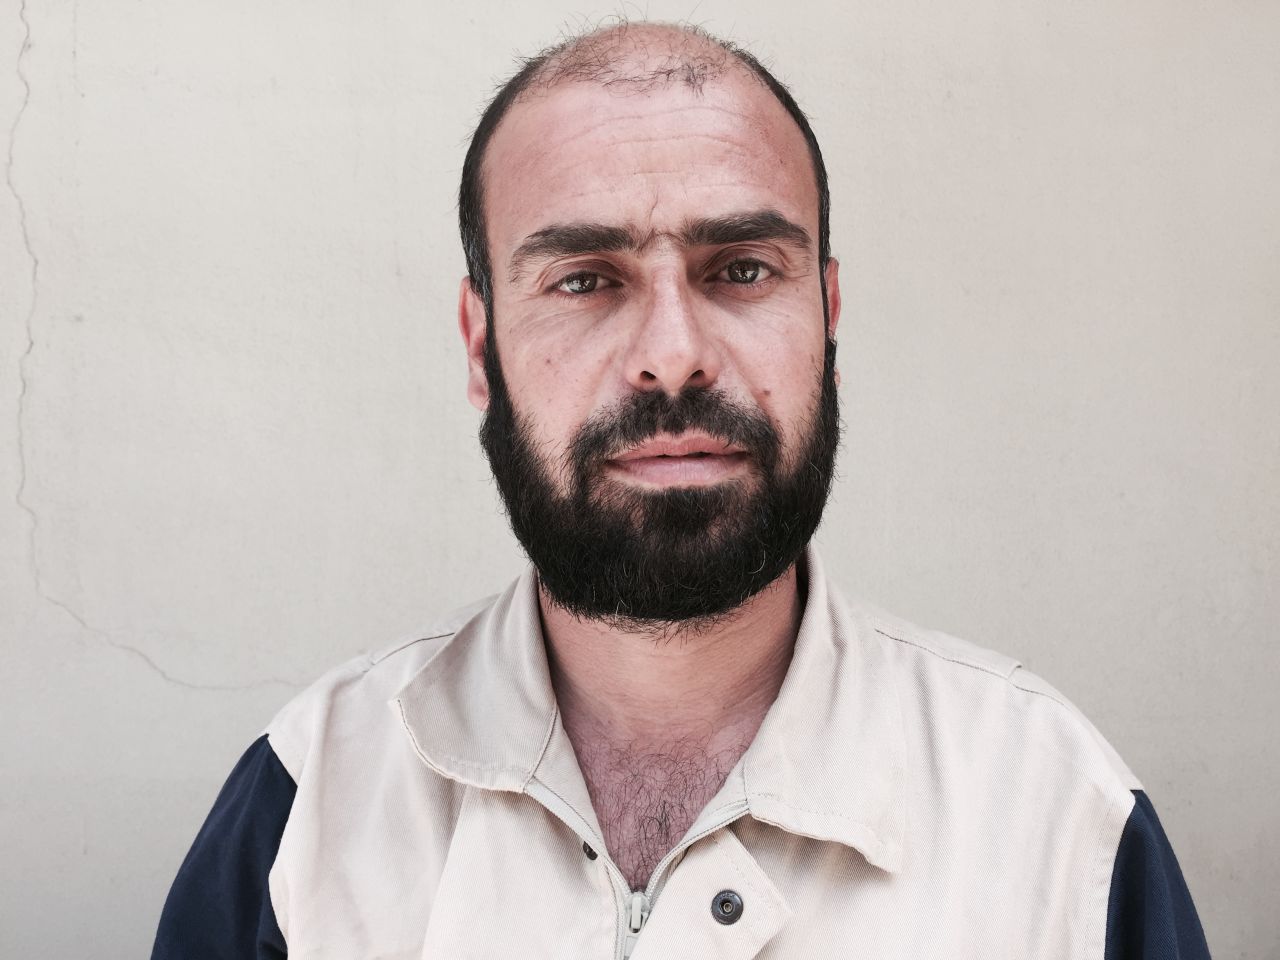 Fadi Ibrahim, 36. Carpet factory employee. "In my village, a man was stuck under the rubble. Three hours later, we got him out. This is someone that I know, walk by on the street and could've been dead."